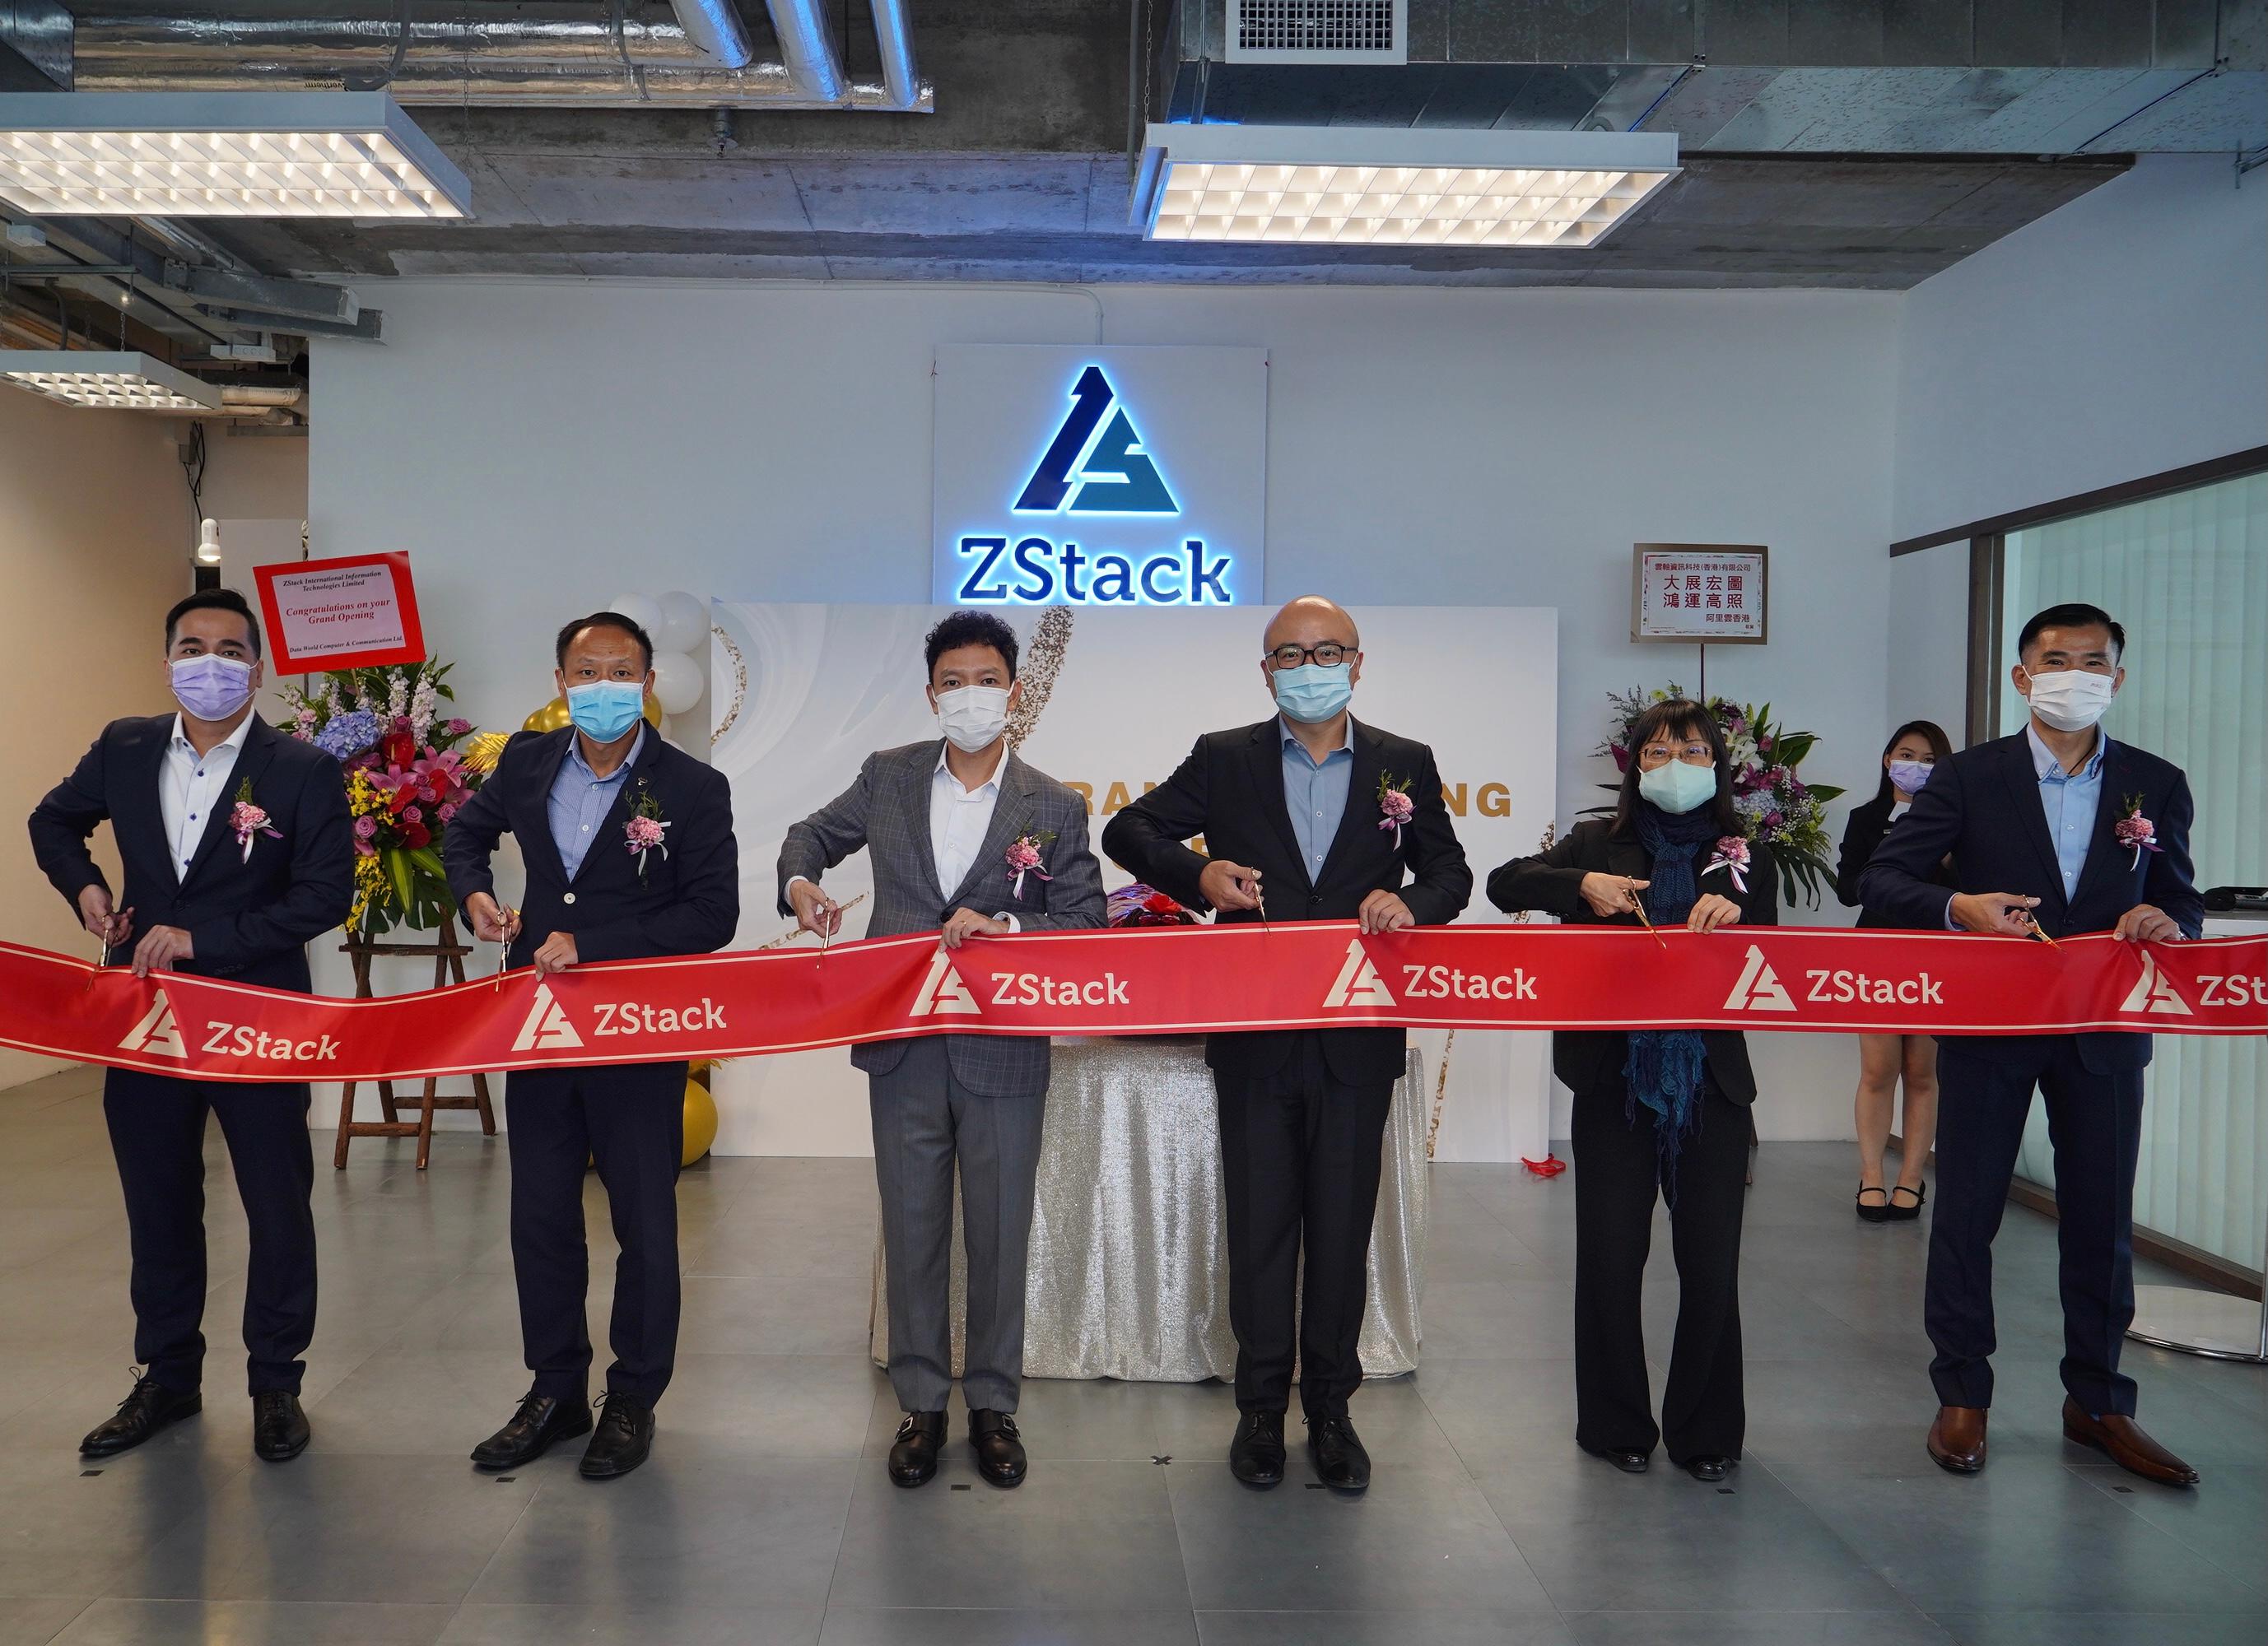 Mainland cloud computing technologies supplier ZStack has set up its regional headquarters, ZStack International Information Technologies Limited, in Hong Kong and officially opened its new office today (December 15). Photo shows (from left) the Director and the General Manager of Data World Computer and Communications Limited, Mr Henry Ng; the Vice President of Enterprise Business of China Telecom Global Limited, Mr Richard Zhu; the Vice President of Sales of ZStack International Information Technologies Limited, Mr Keith Poon; the General Manager of HTMP Region of Alibaba Cloud, Mr Leo Liu; the Head of Information and Communications Technology of Invest Hong Kong, Ms Wendy Chow; and the Sales Director of ZStack International Information Technologies Limited, Mr Leo Sin, at the opening ceremony.
